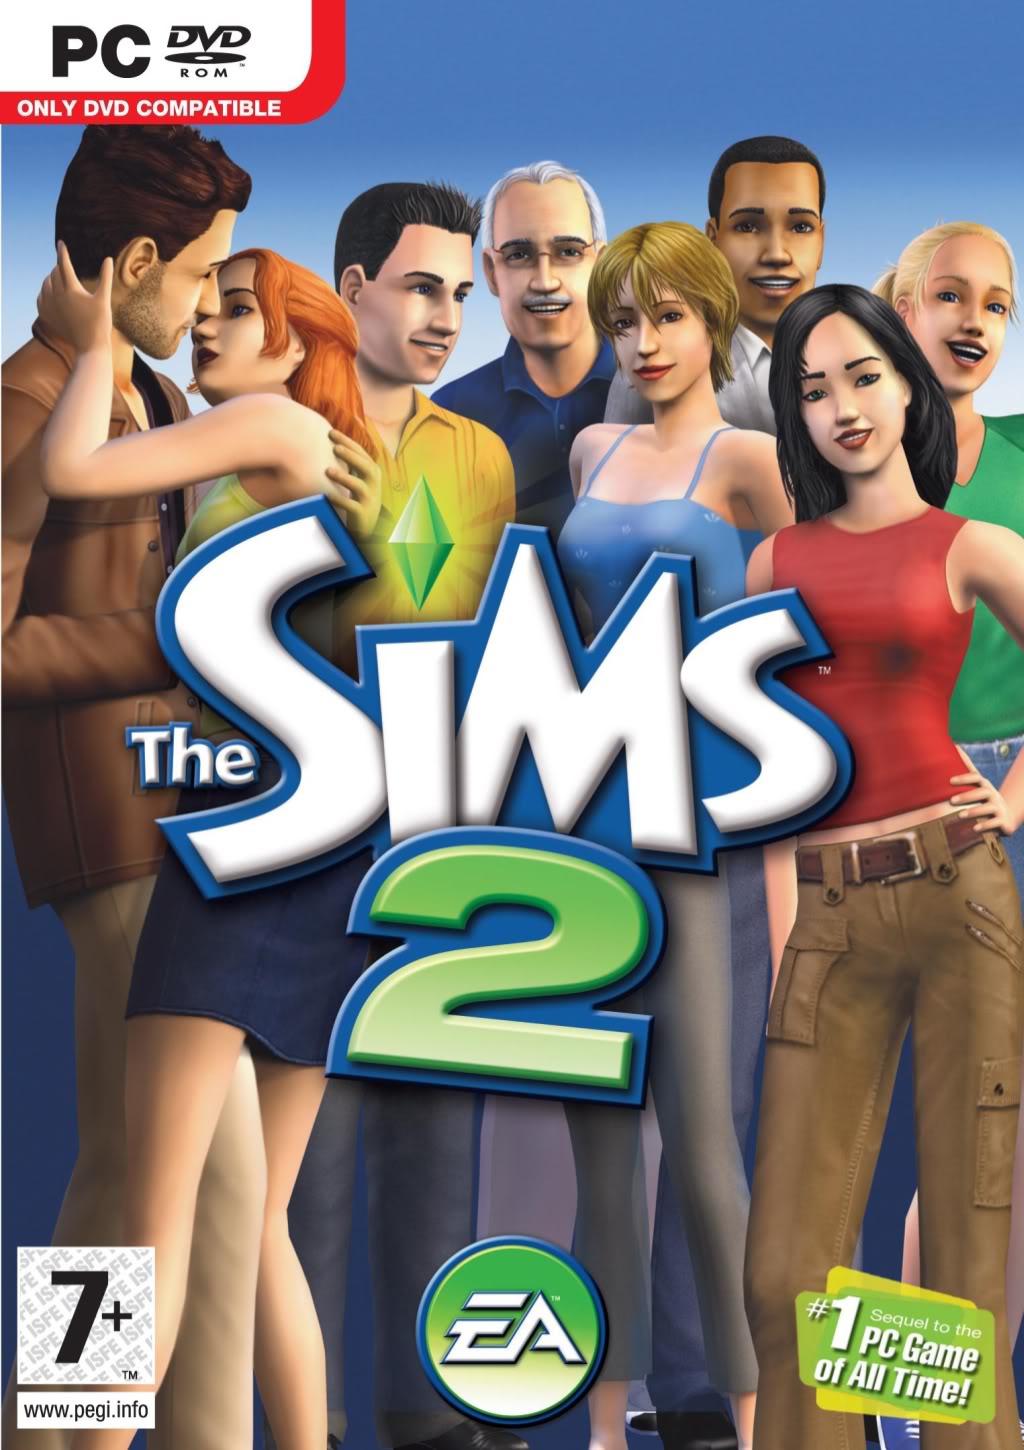 The Sims 2 | The Sims Wiki | Fandom